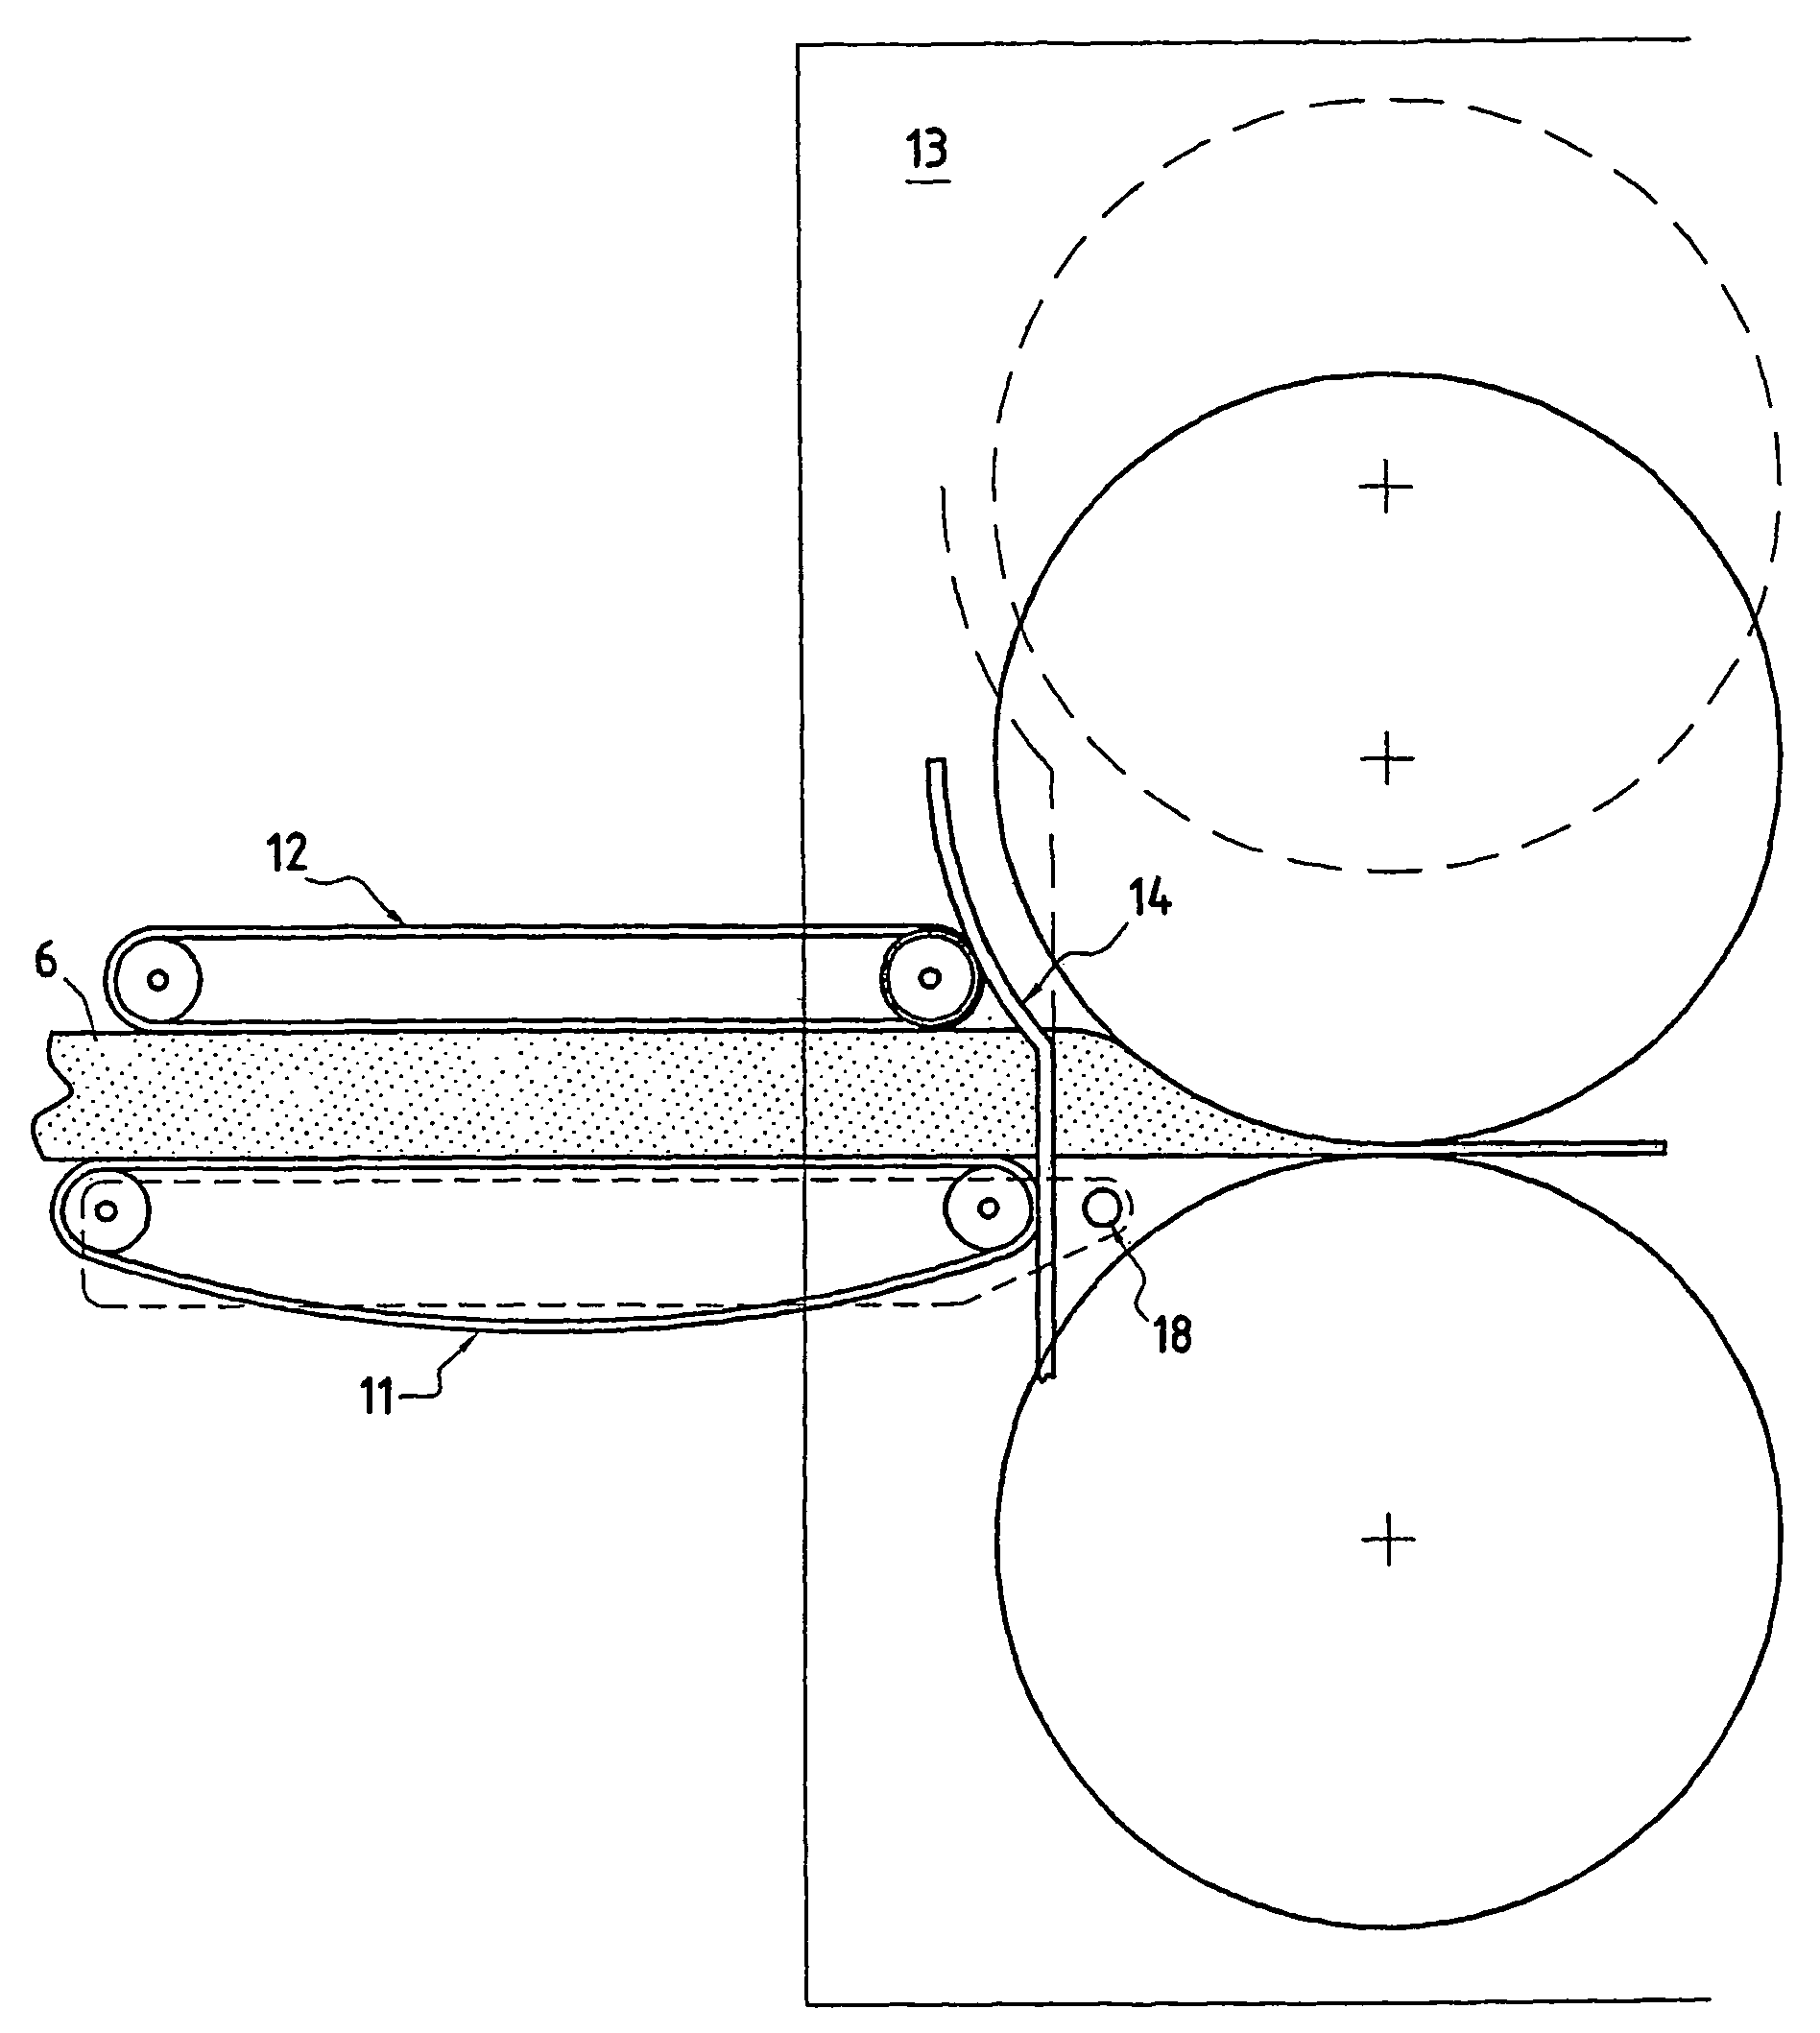 Method and device for making mineral fiber felts